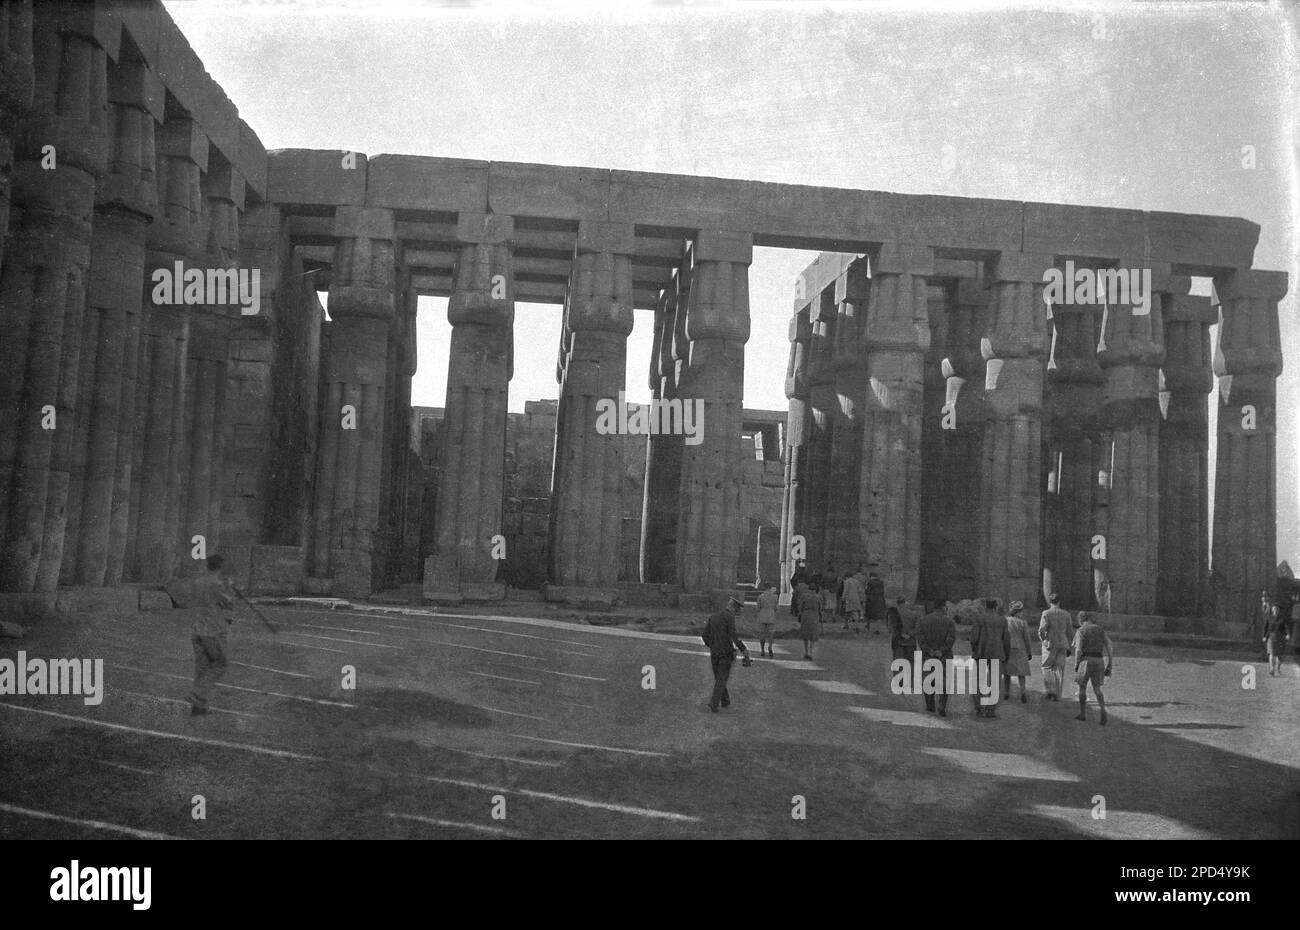 circa 1940s, historical, the ancient ruins at the Temple of Karnak, Luxor, Egypt. Picture shows visitors at the Great Hypostyle Hall in the Precinct of Amun-Ra, which at one time had a roof supported by 134 columns in 16 rows. Stock Photo